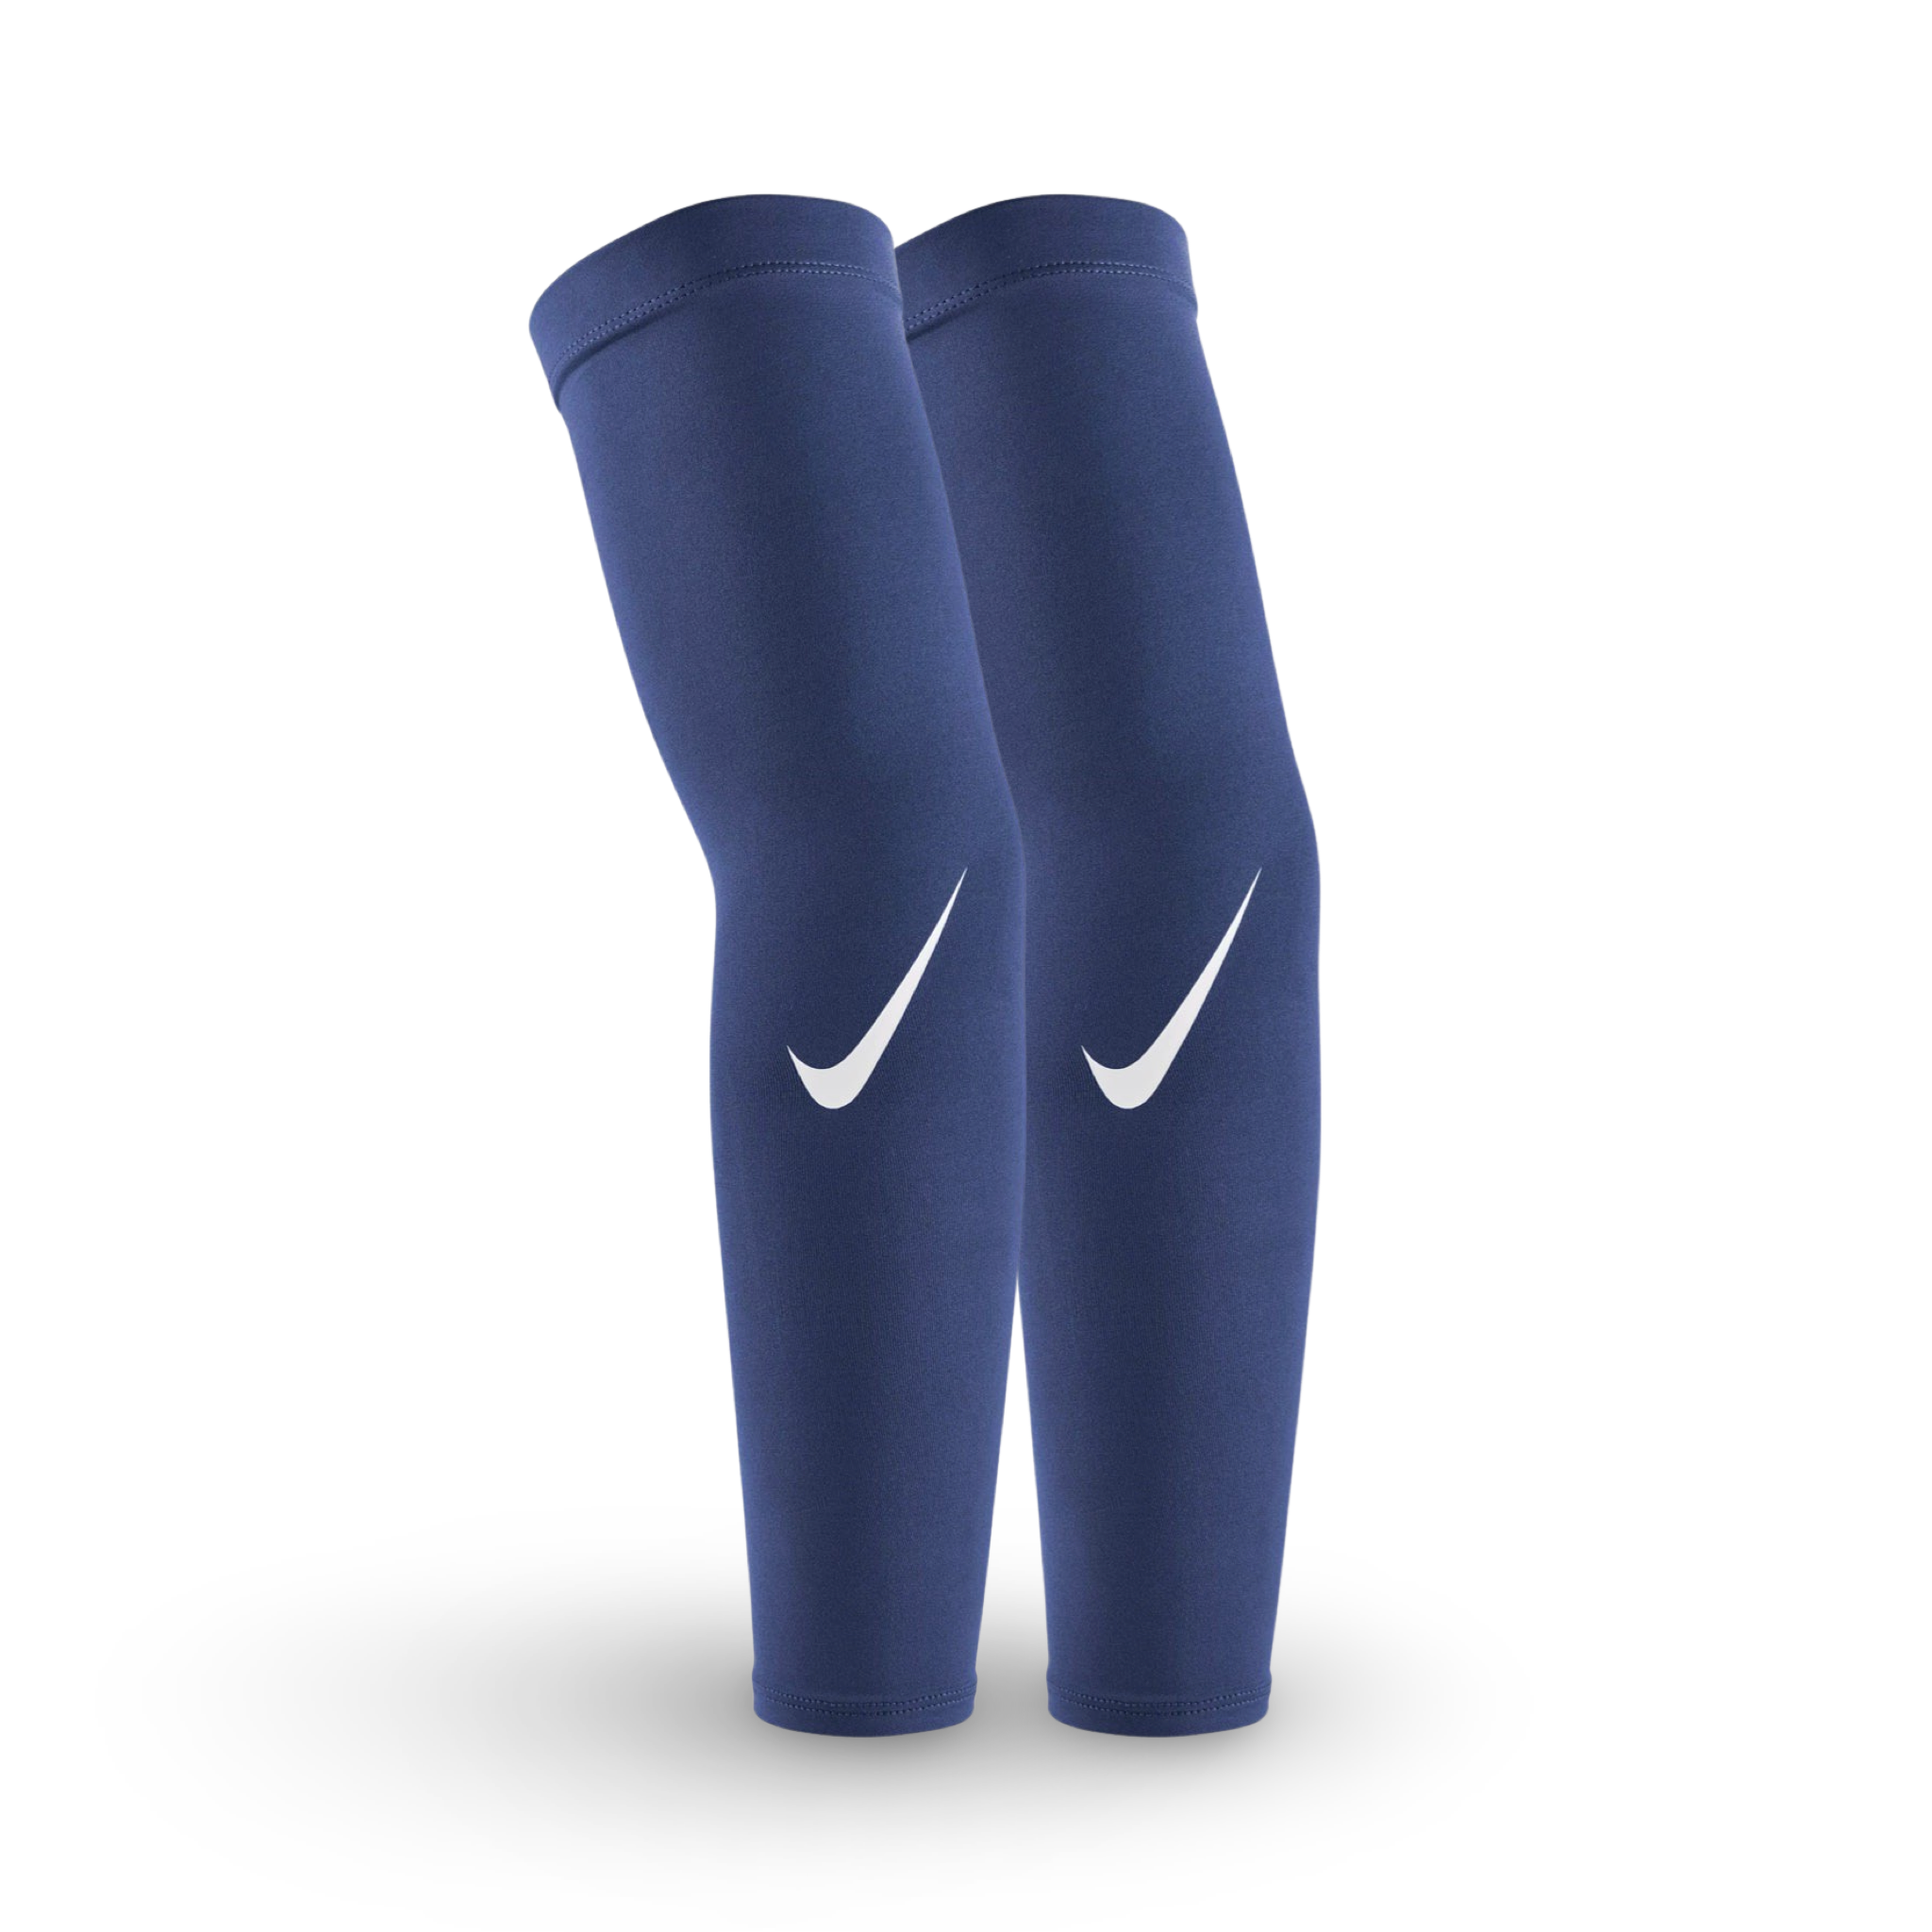 Nike Pro Dri-fit Arm Sleeves 4.0 - Adult &amp; Youth